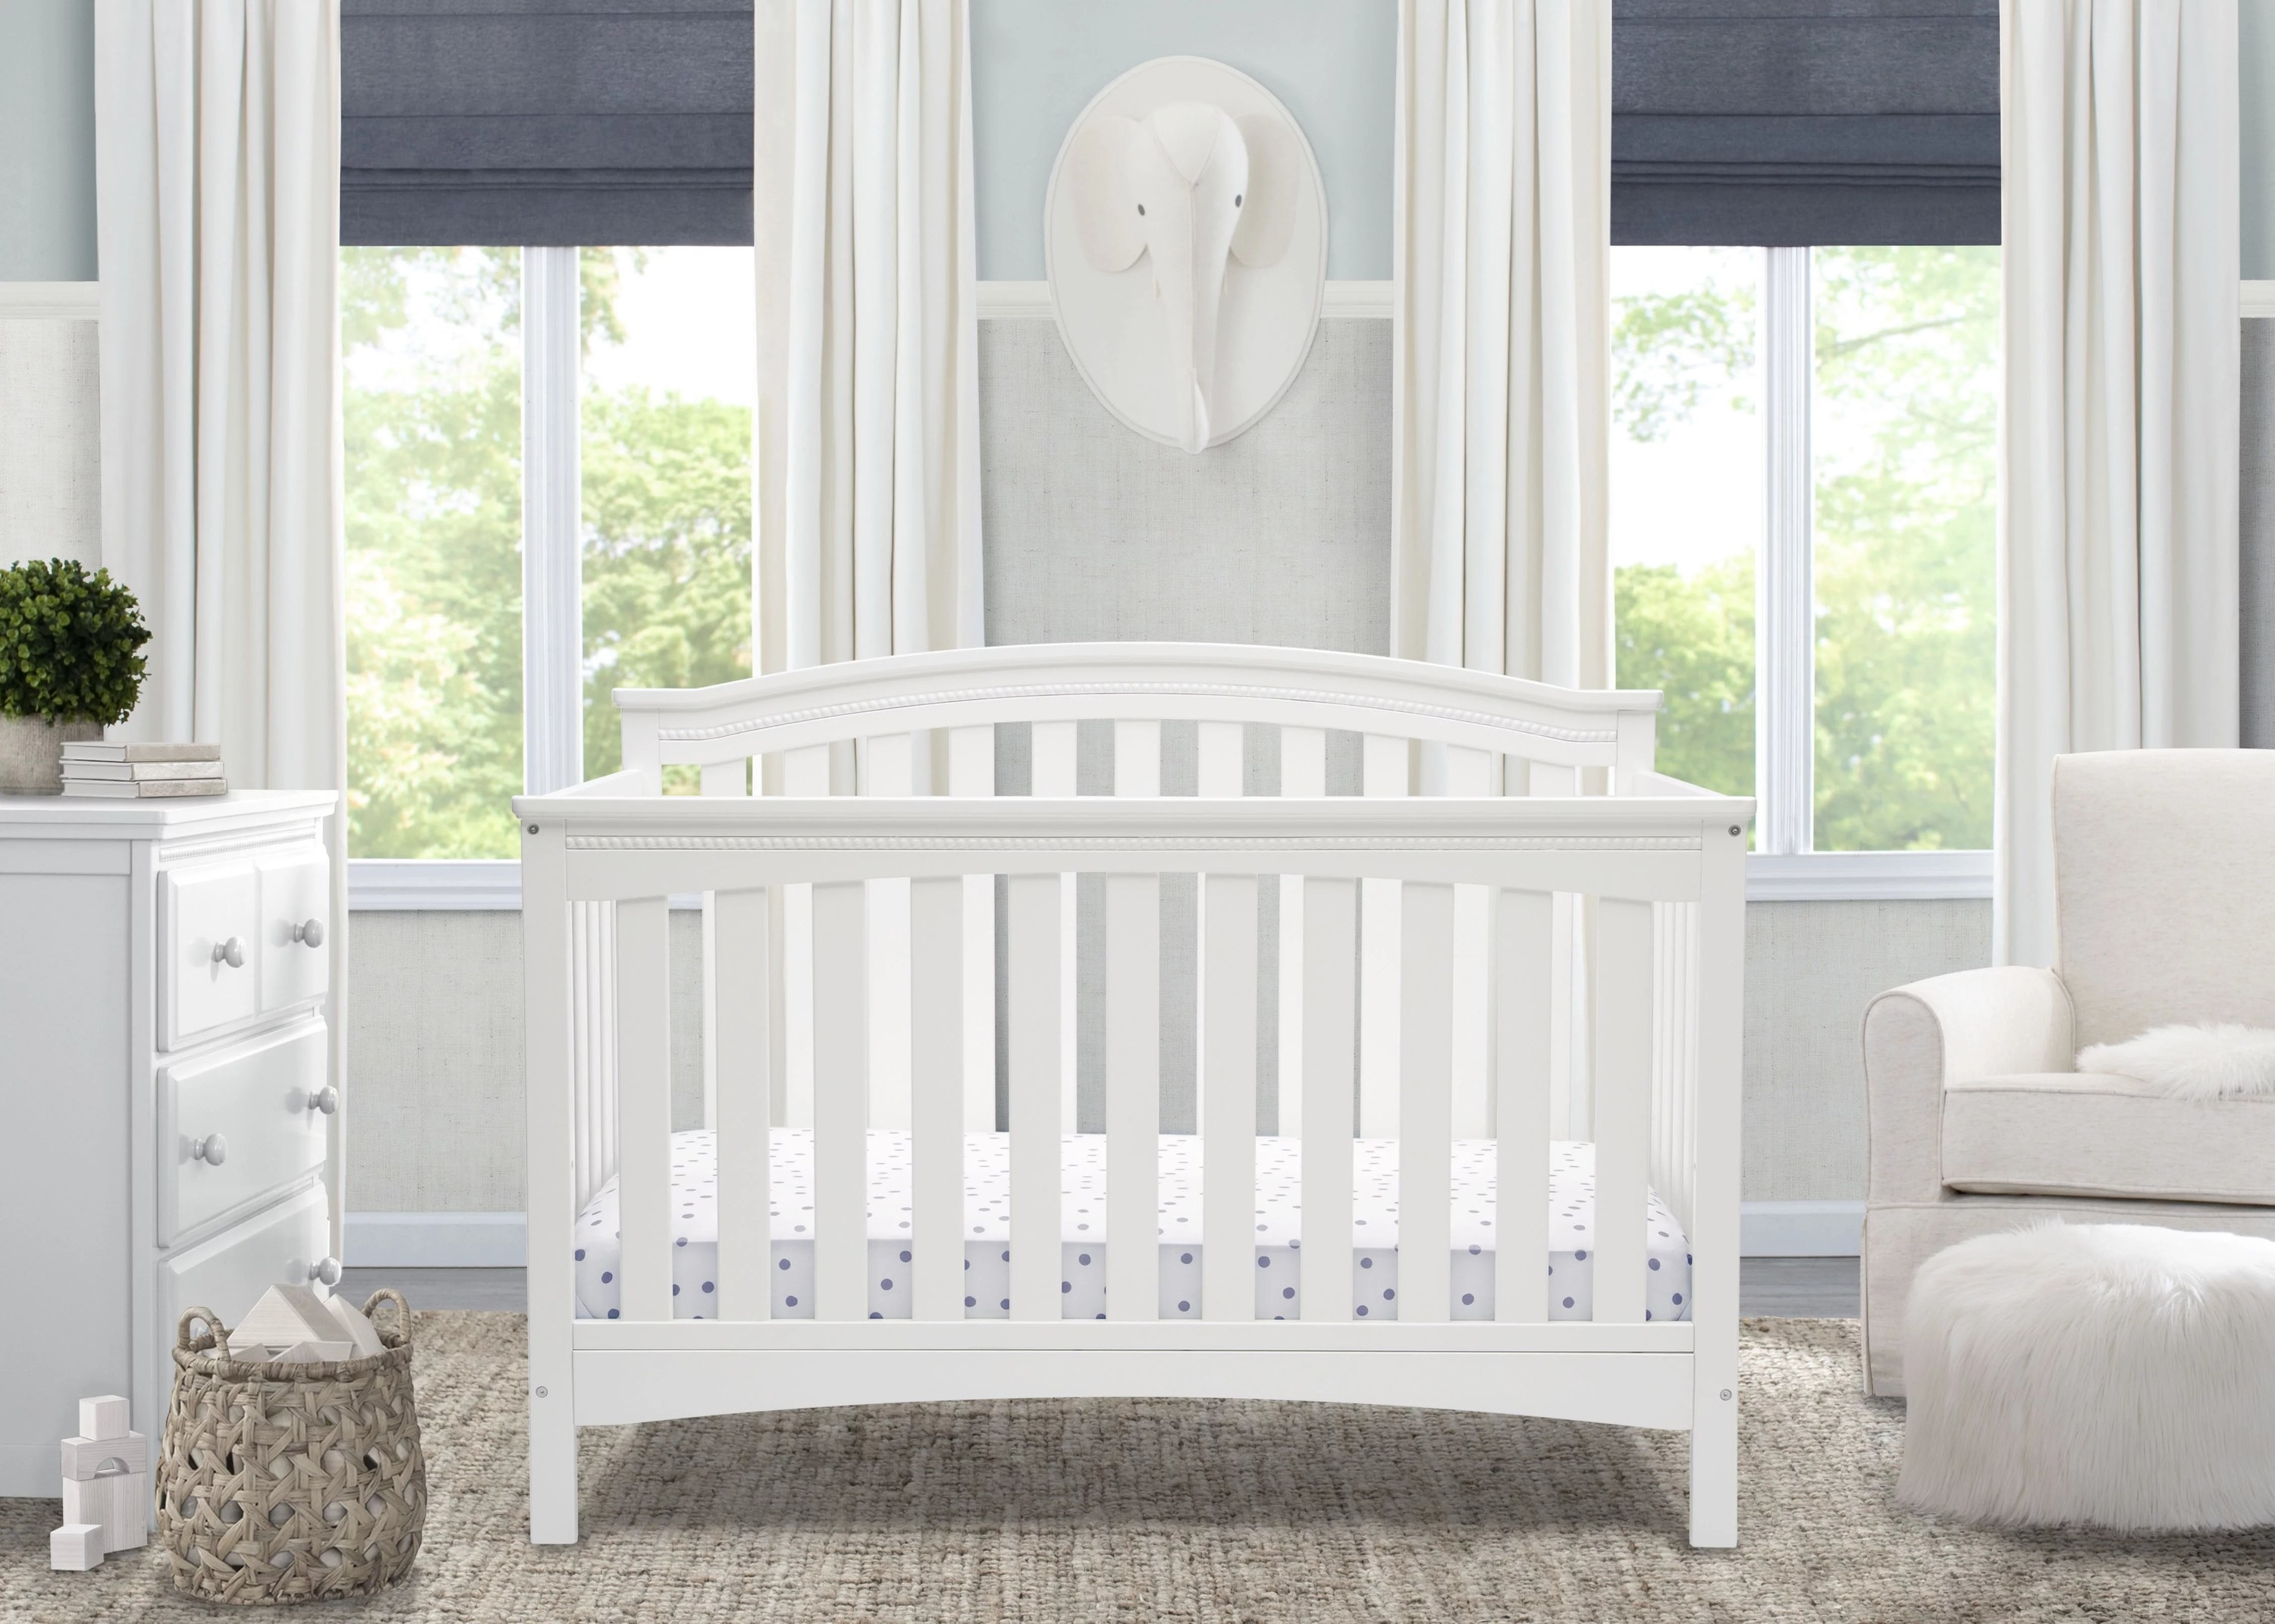 A white convertible crib in a nursery bedroom